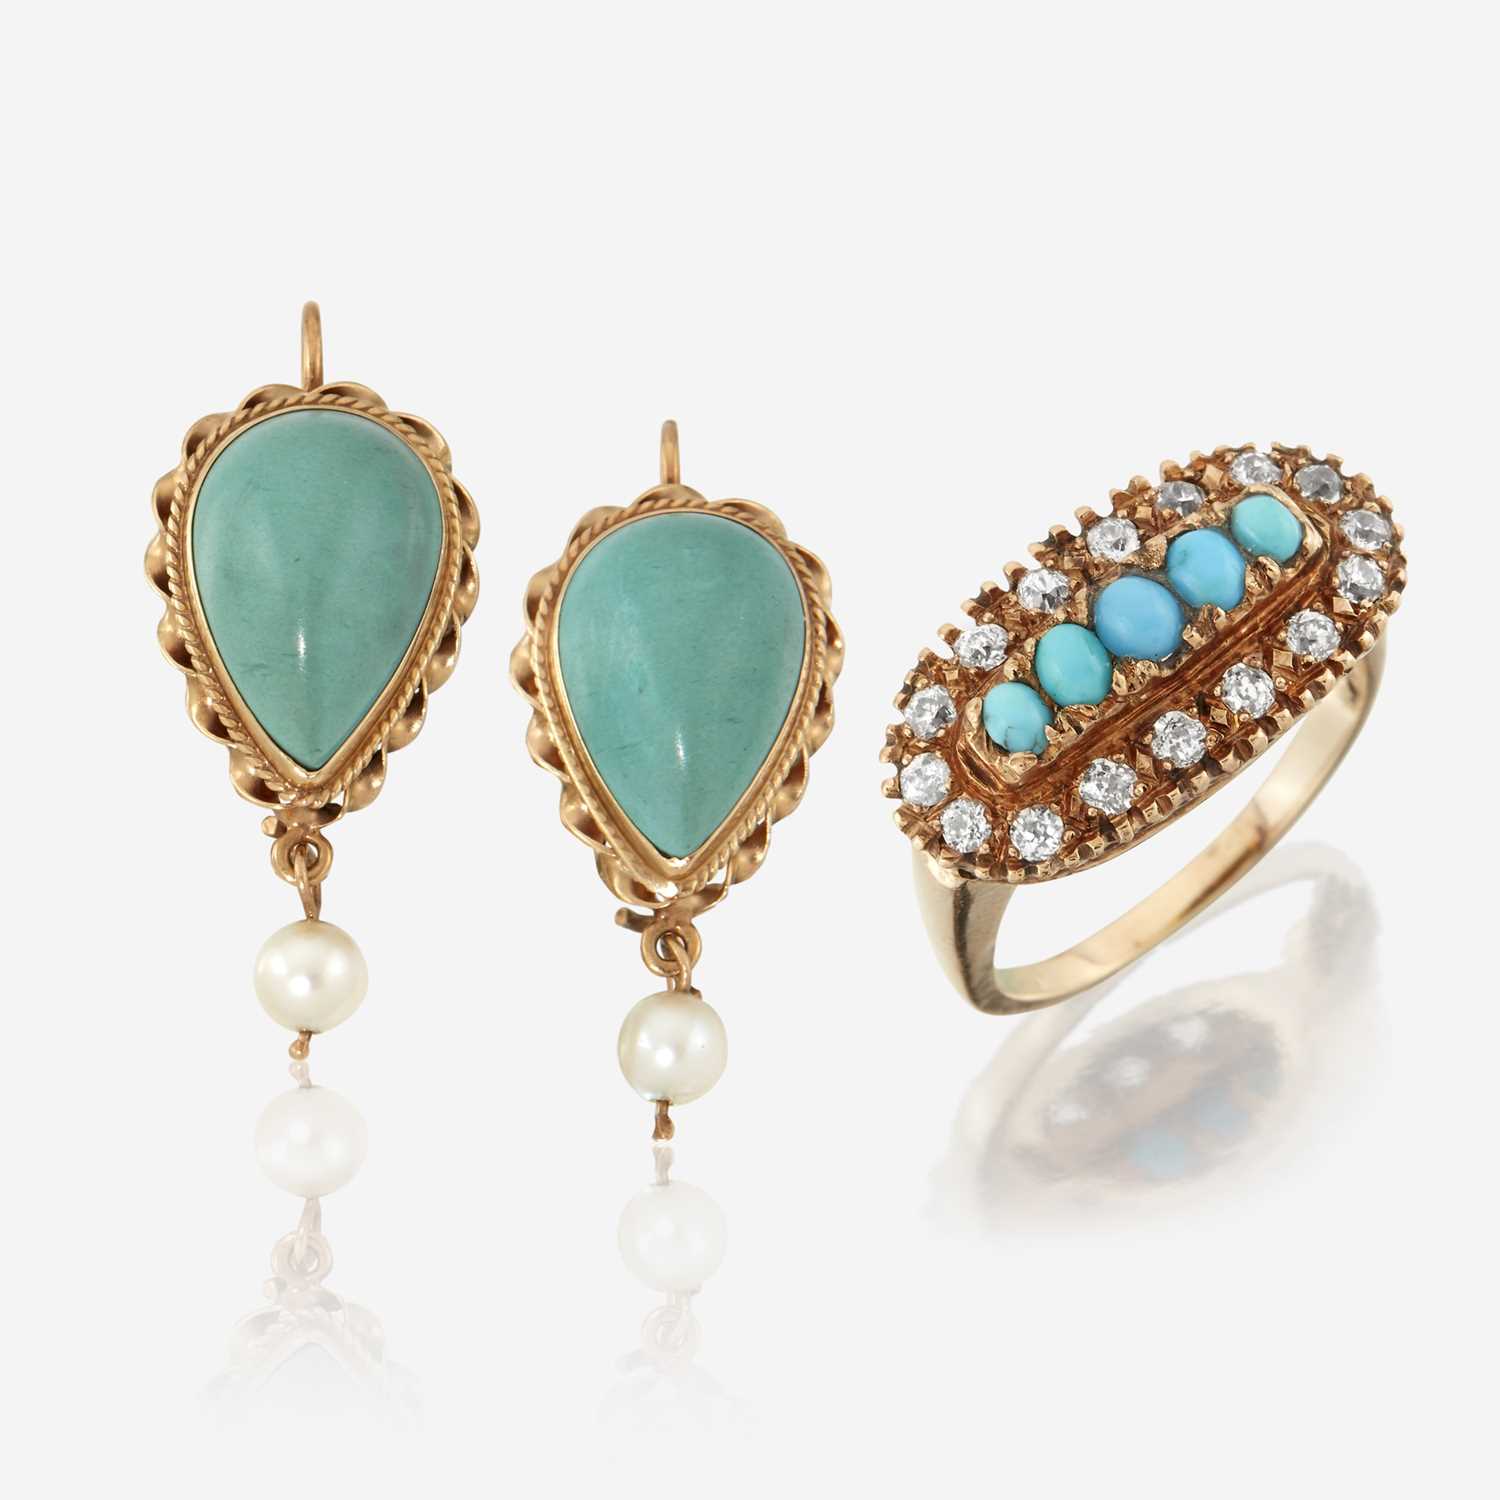 Lot 6 - A turquoise and fourteen karat gold ring and earrings